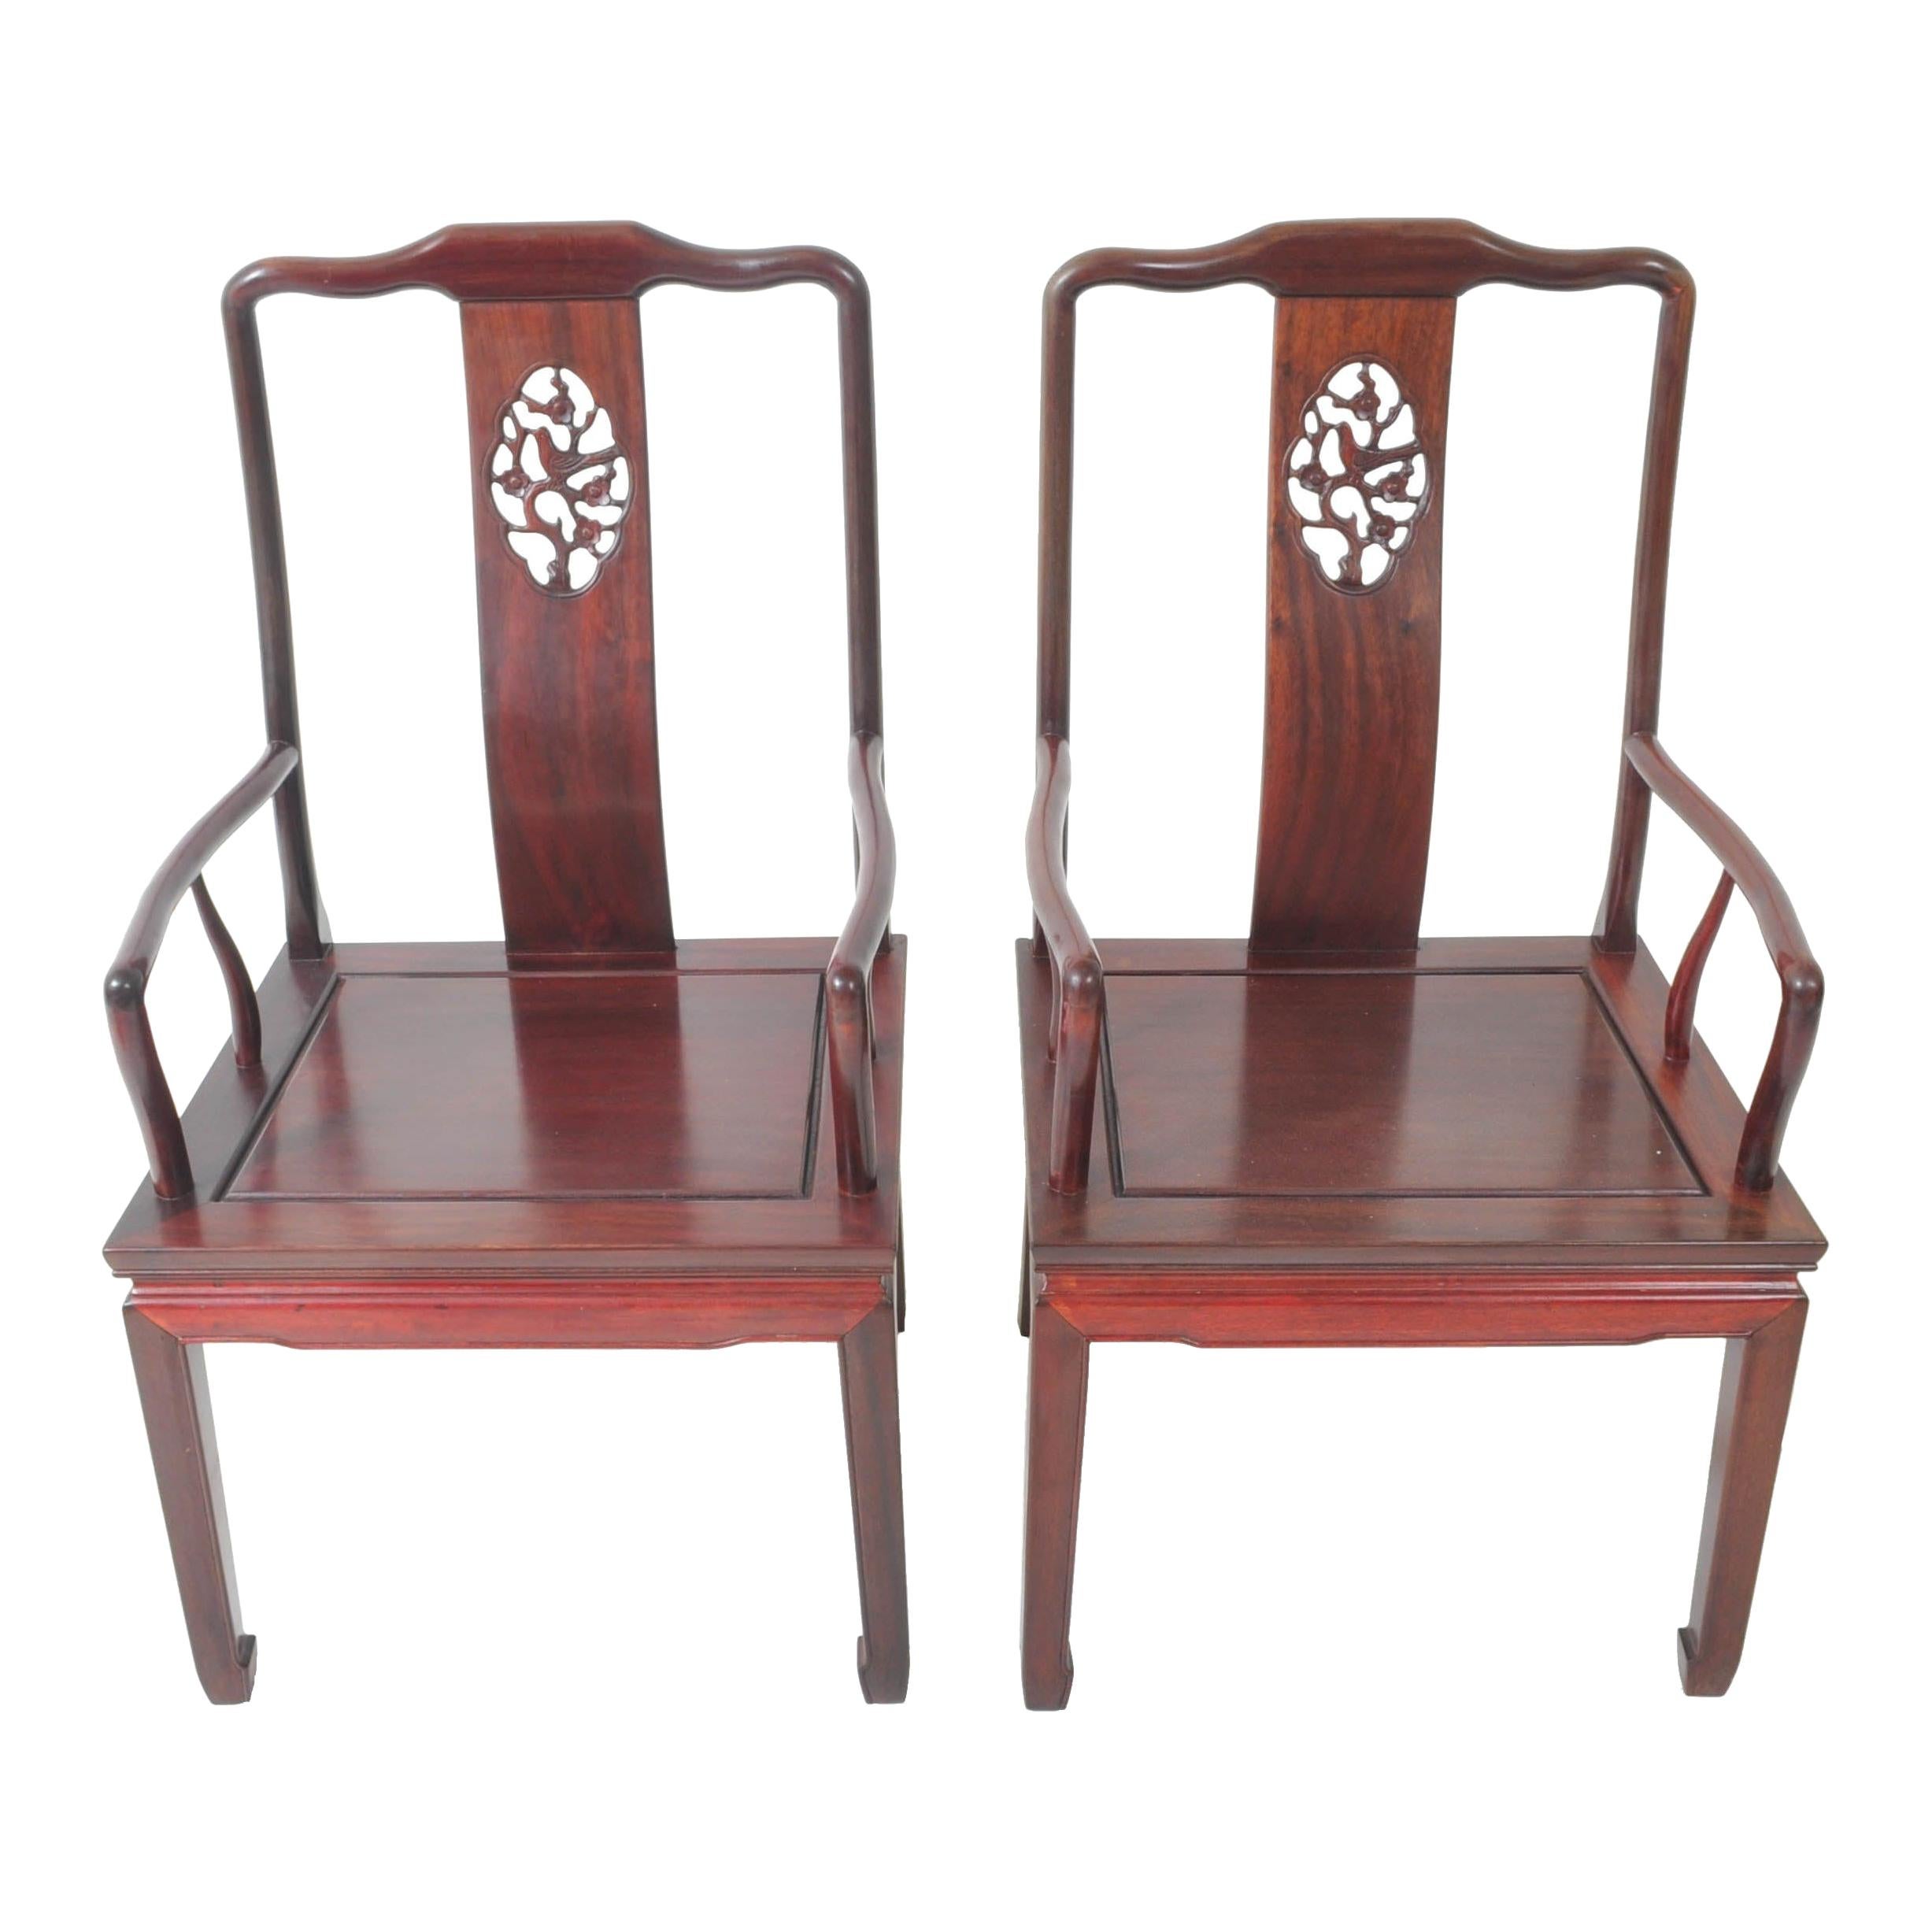 Pair of Antique Chinese Chippendale Rosewood Armchairs, Qing Dynasty, circa 1900